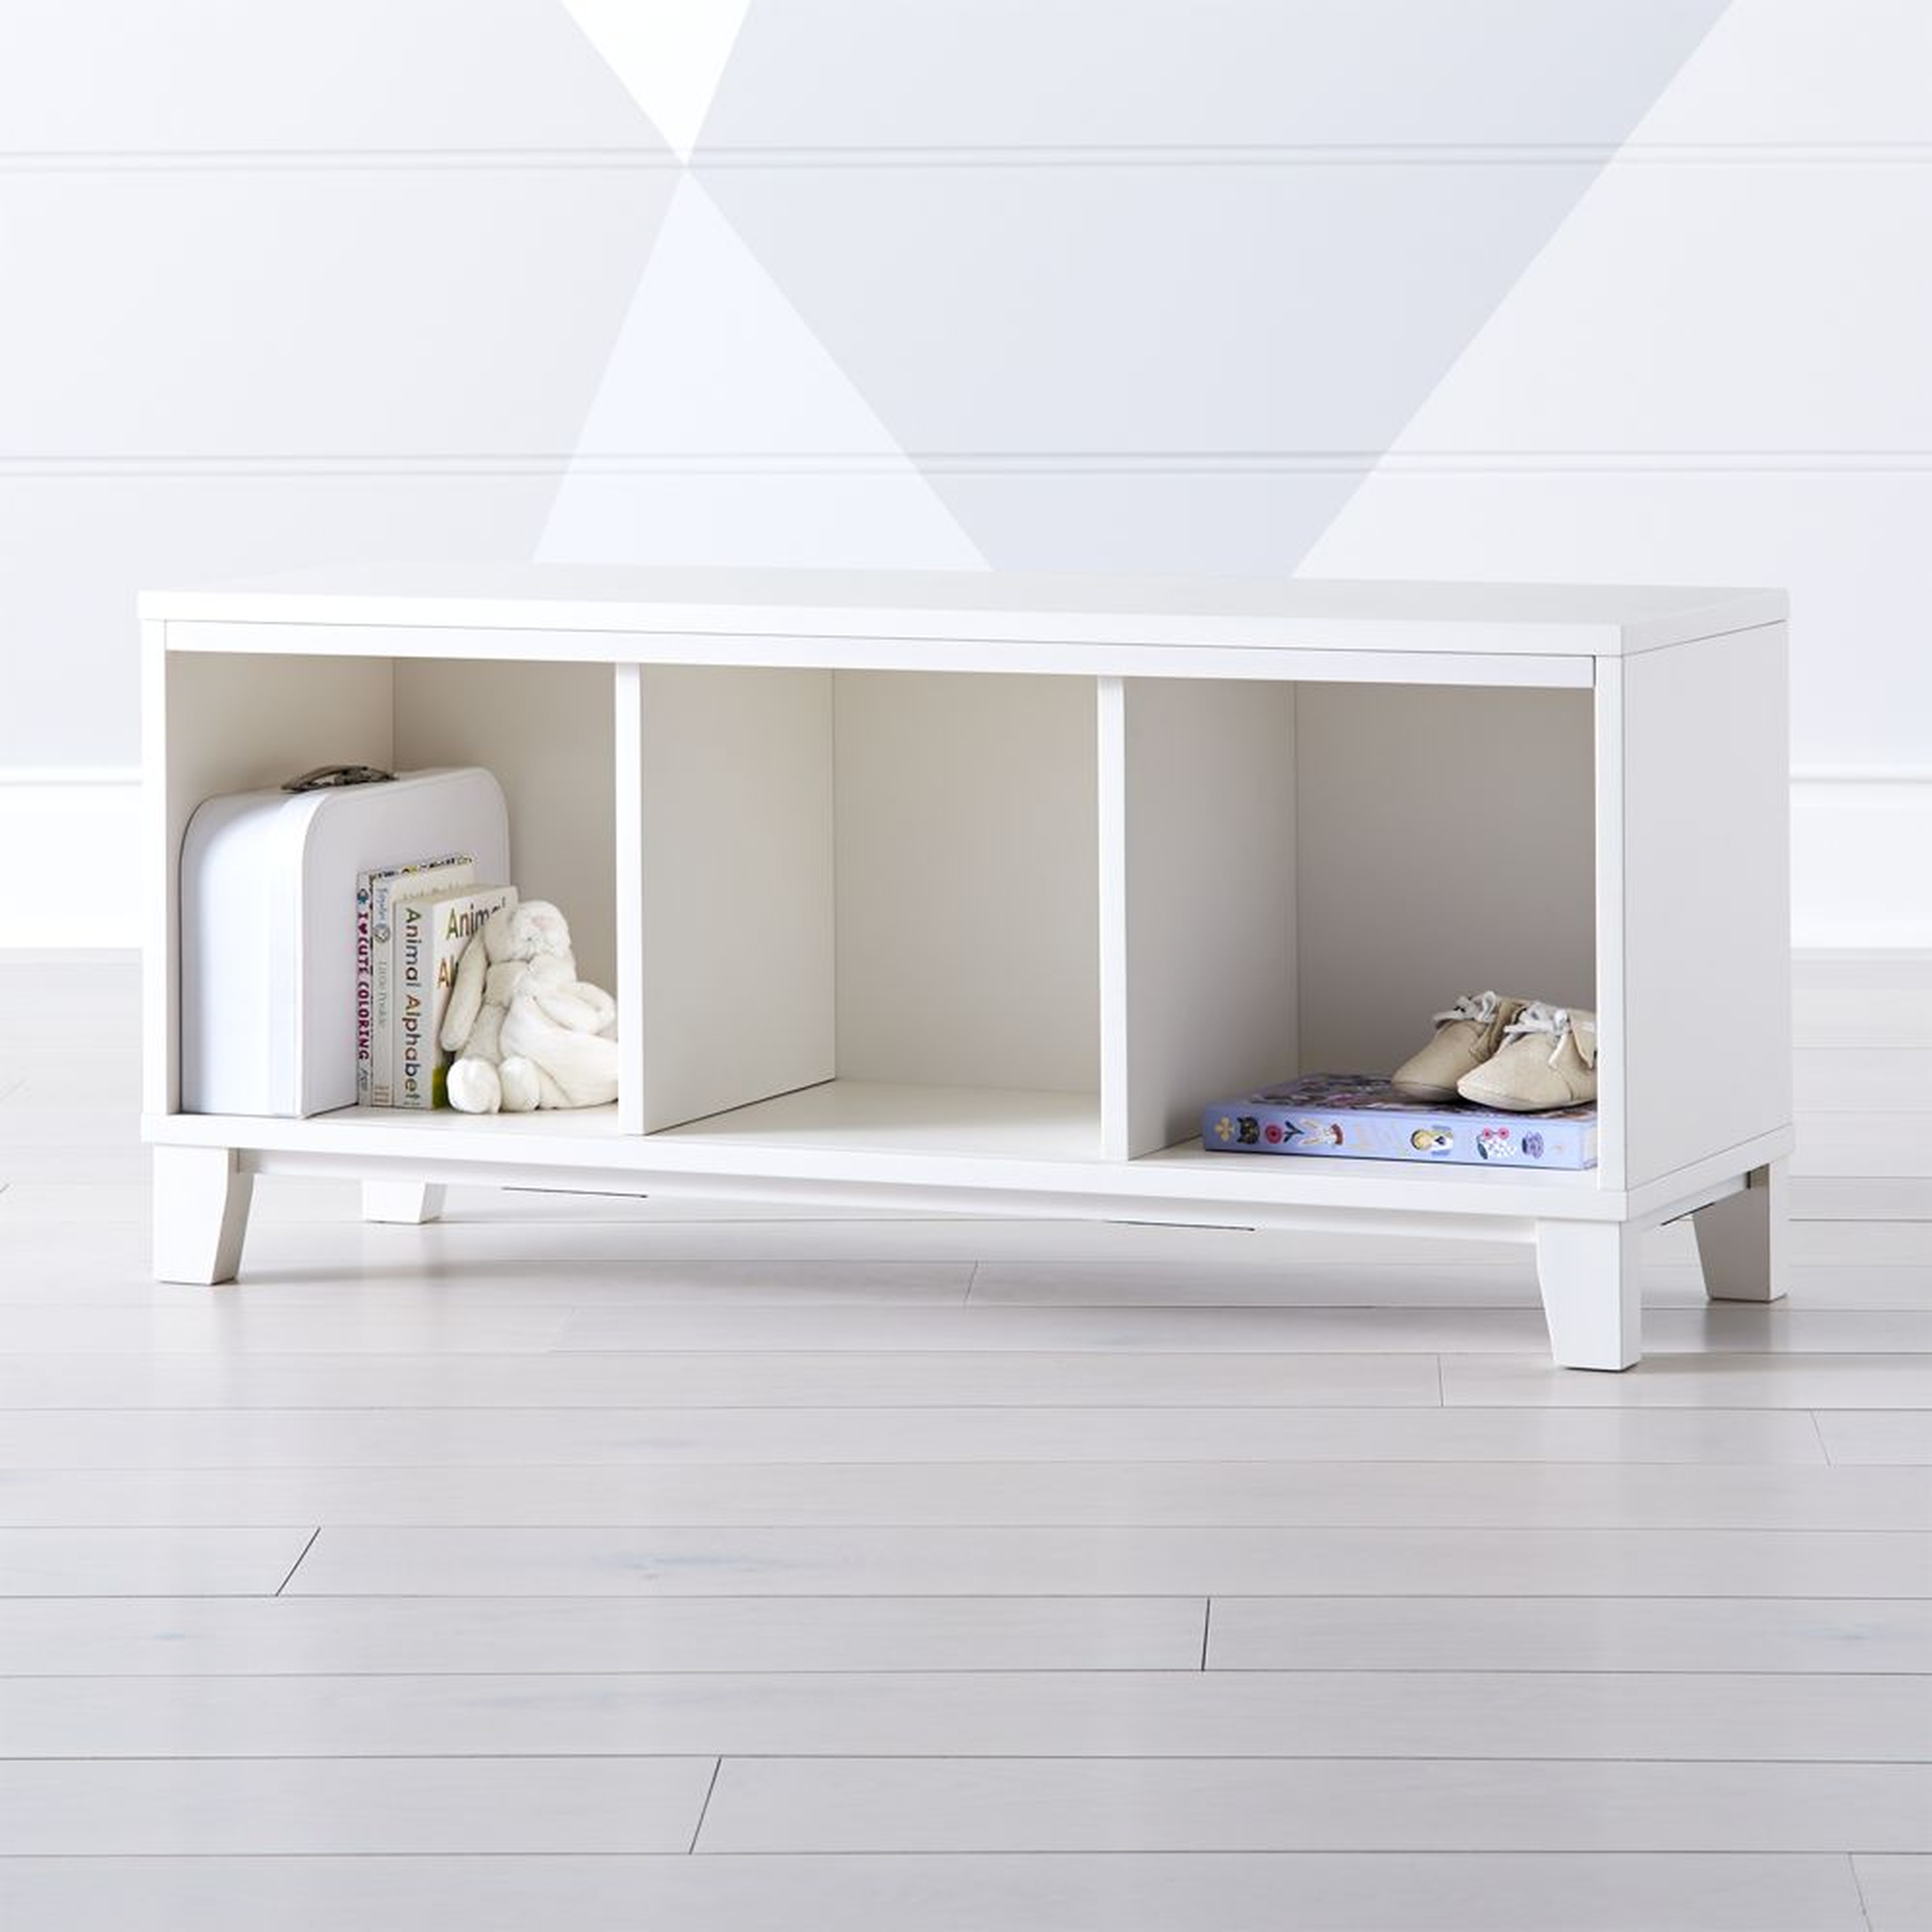 District Stackable 3-Cube Warm White Wood Bookcase - Crate and Barrel